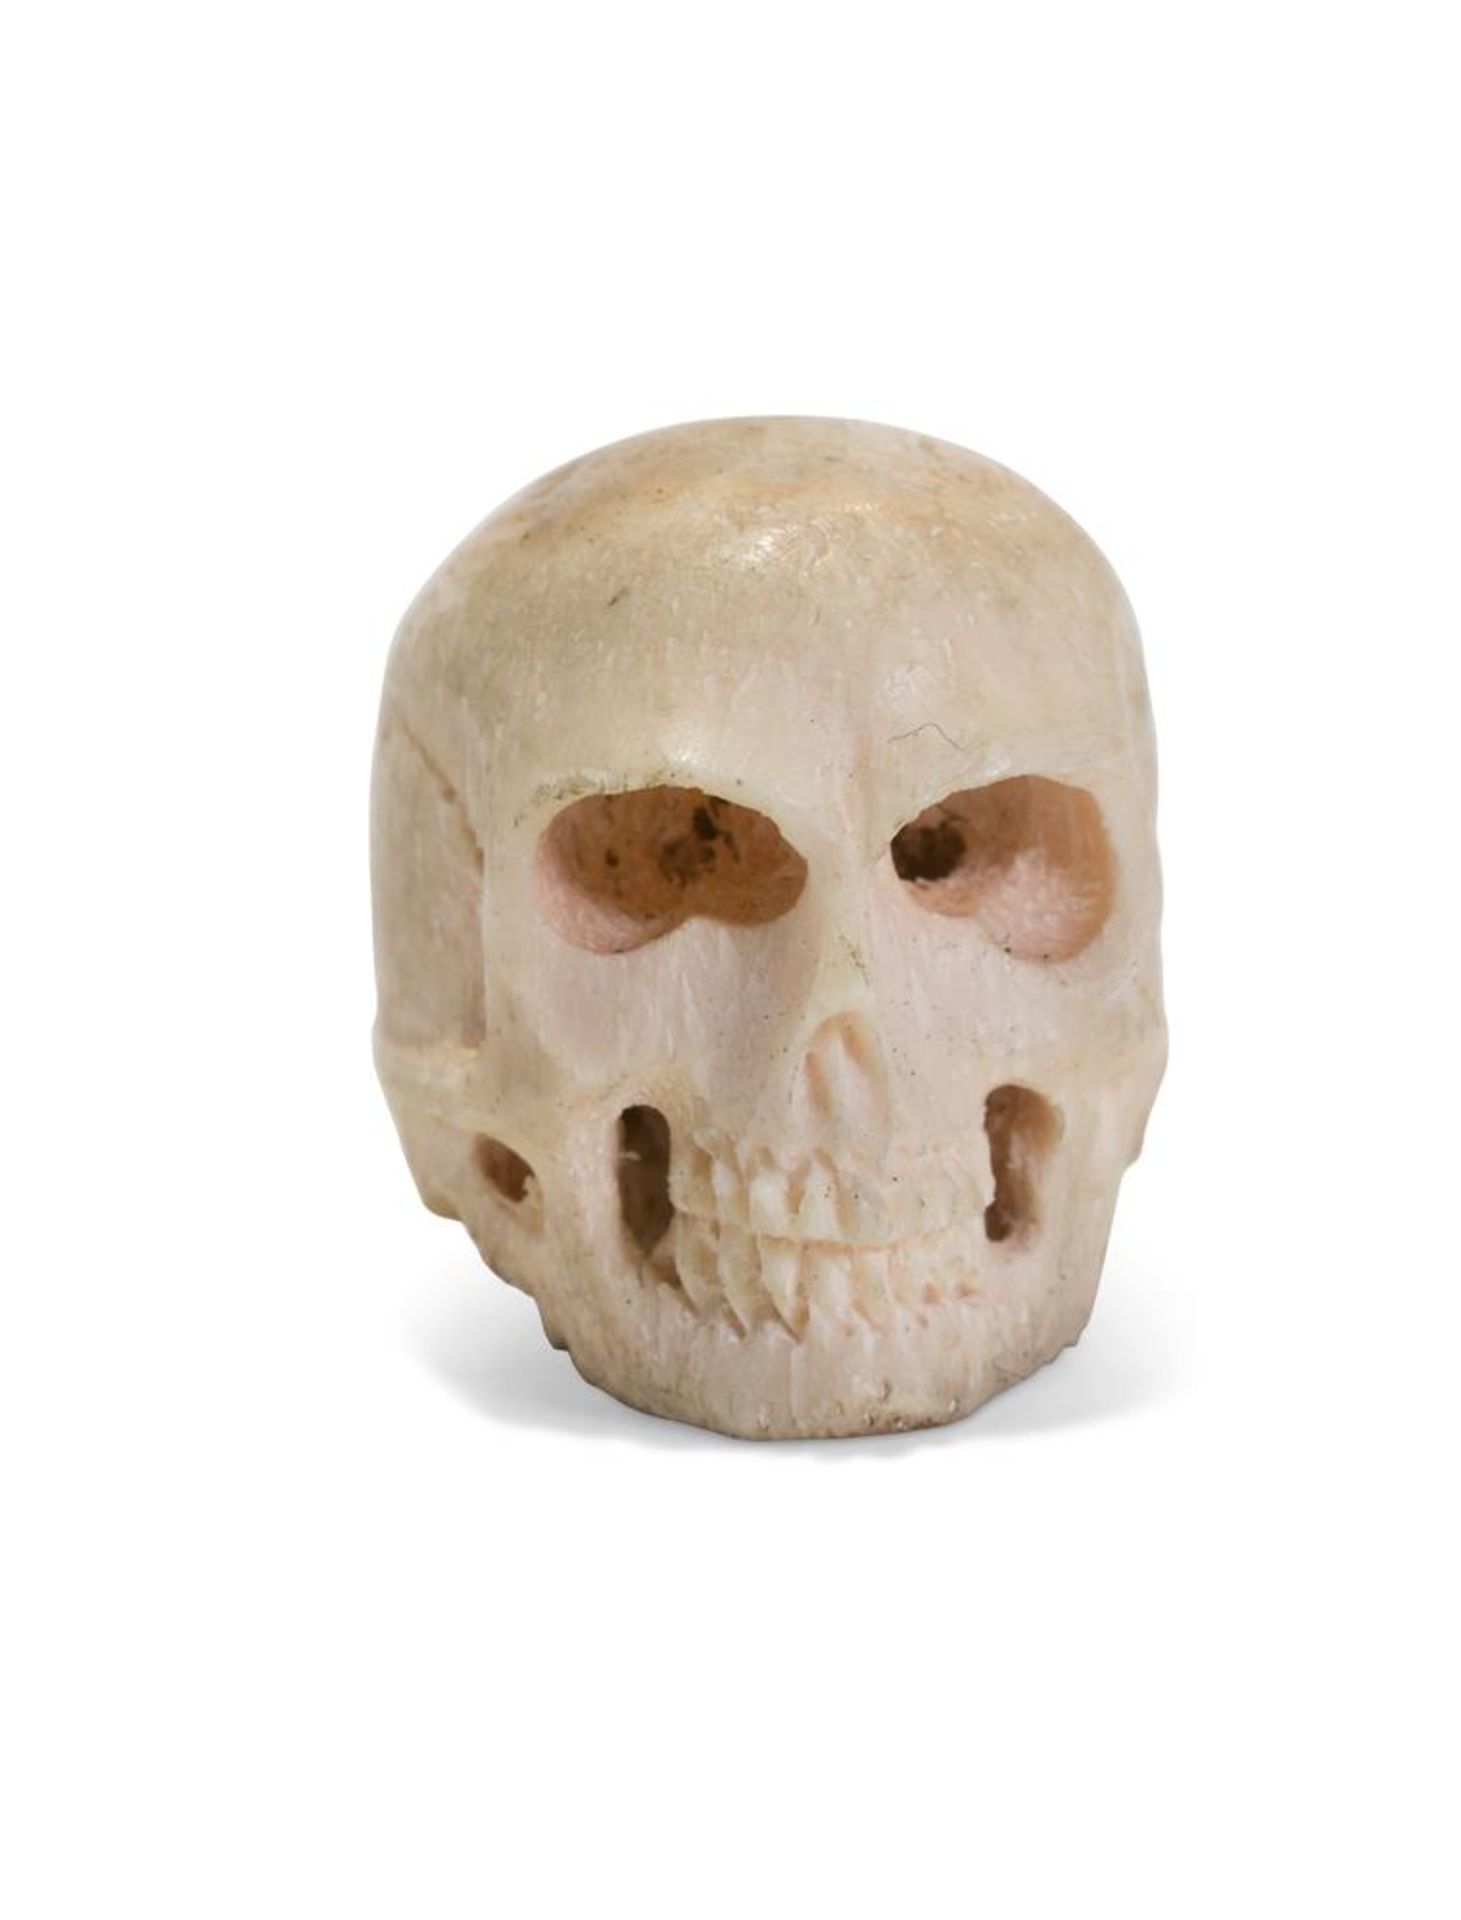 A TINY CARVED BONE MODEL OF A SKULL, PROBABLY JAPANESE OR ITALIAN - Image 2 of 2